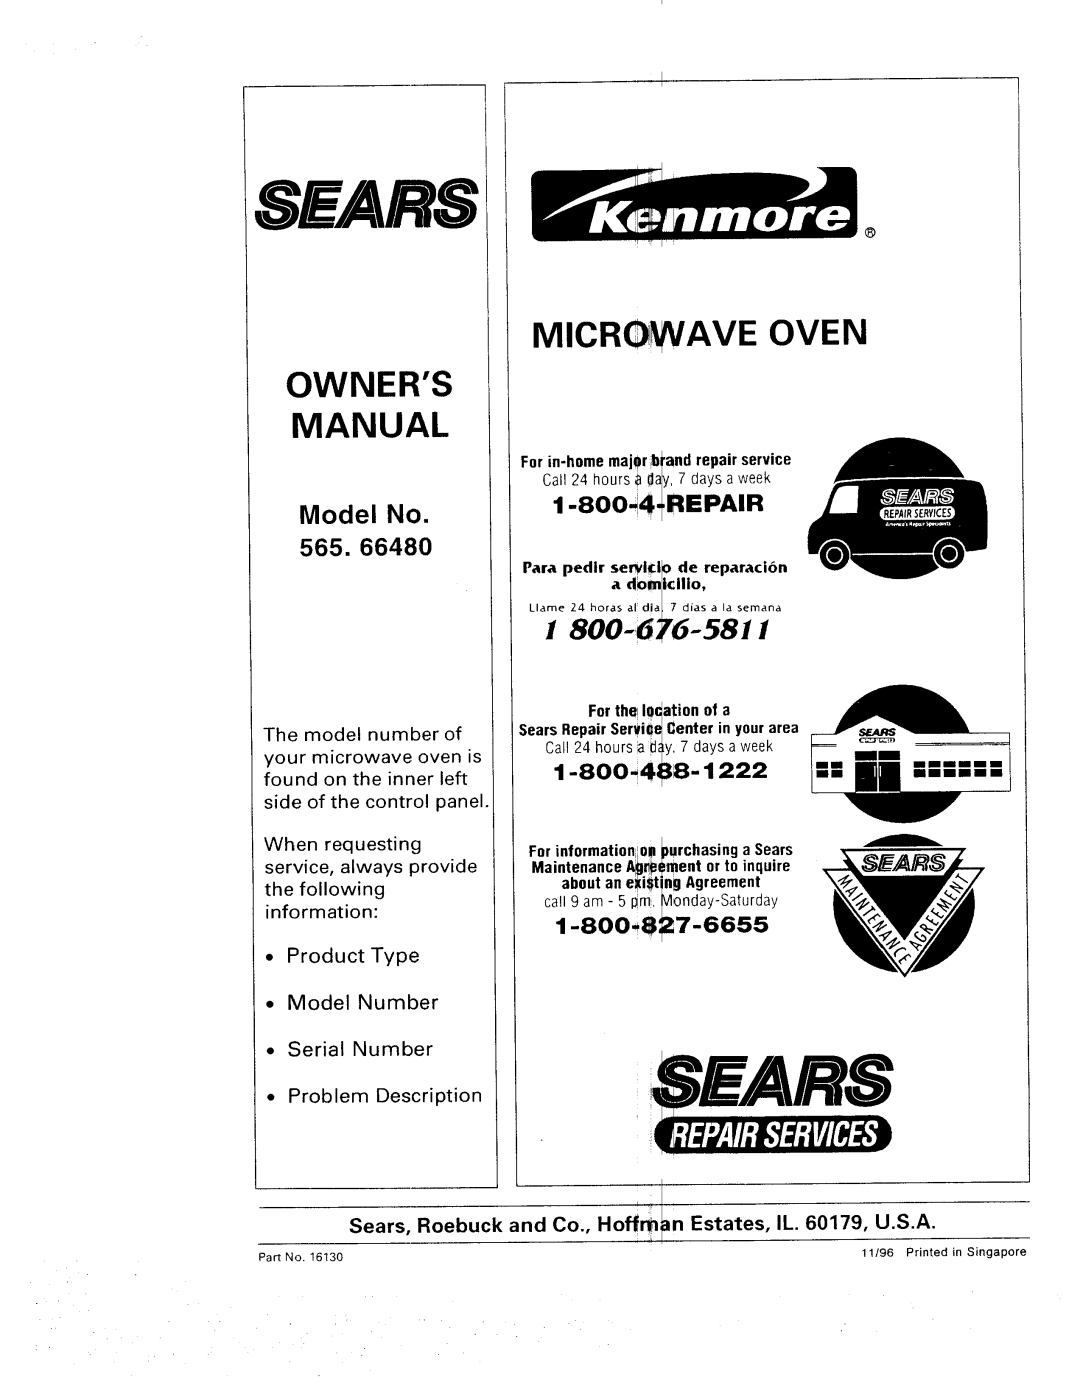 Sears 565. 66480 Microwave Oven Owners Manual, Model No 565.66480, Sears, i800-676-5811, 1-80044+REPAIR, •Model Number 